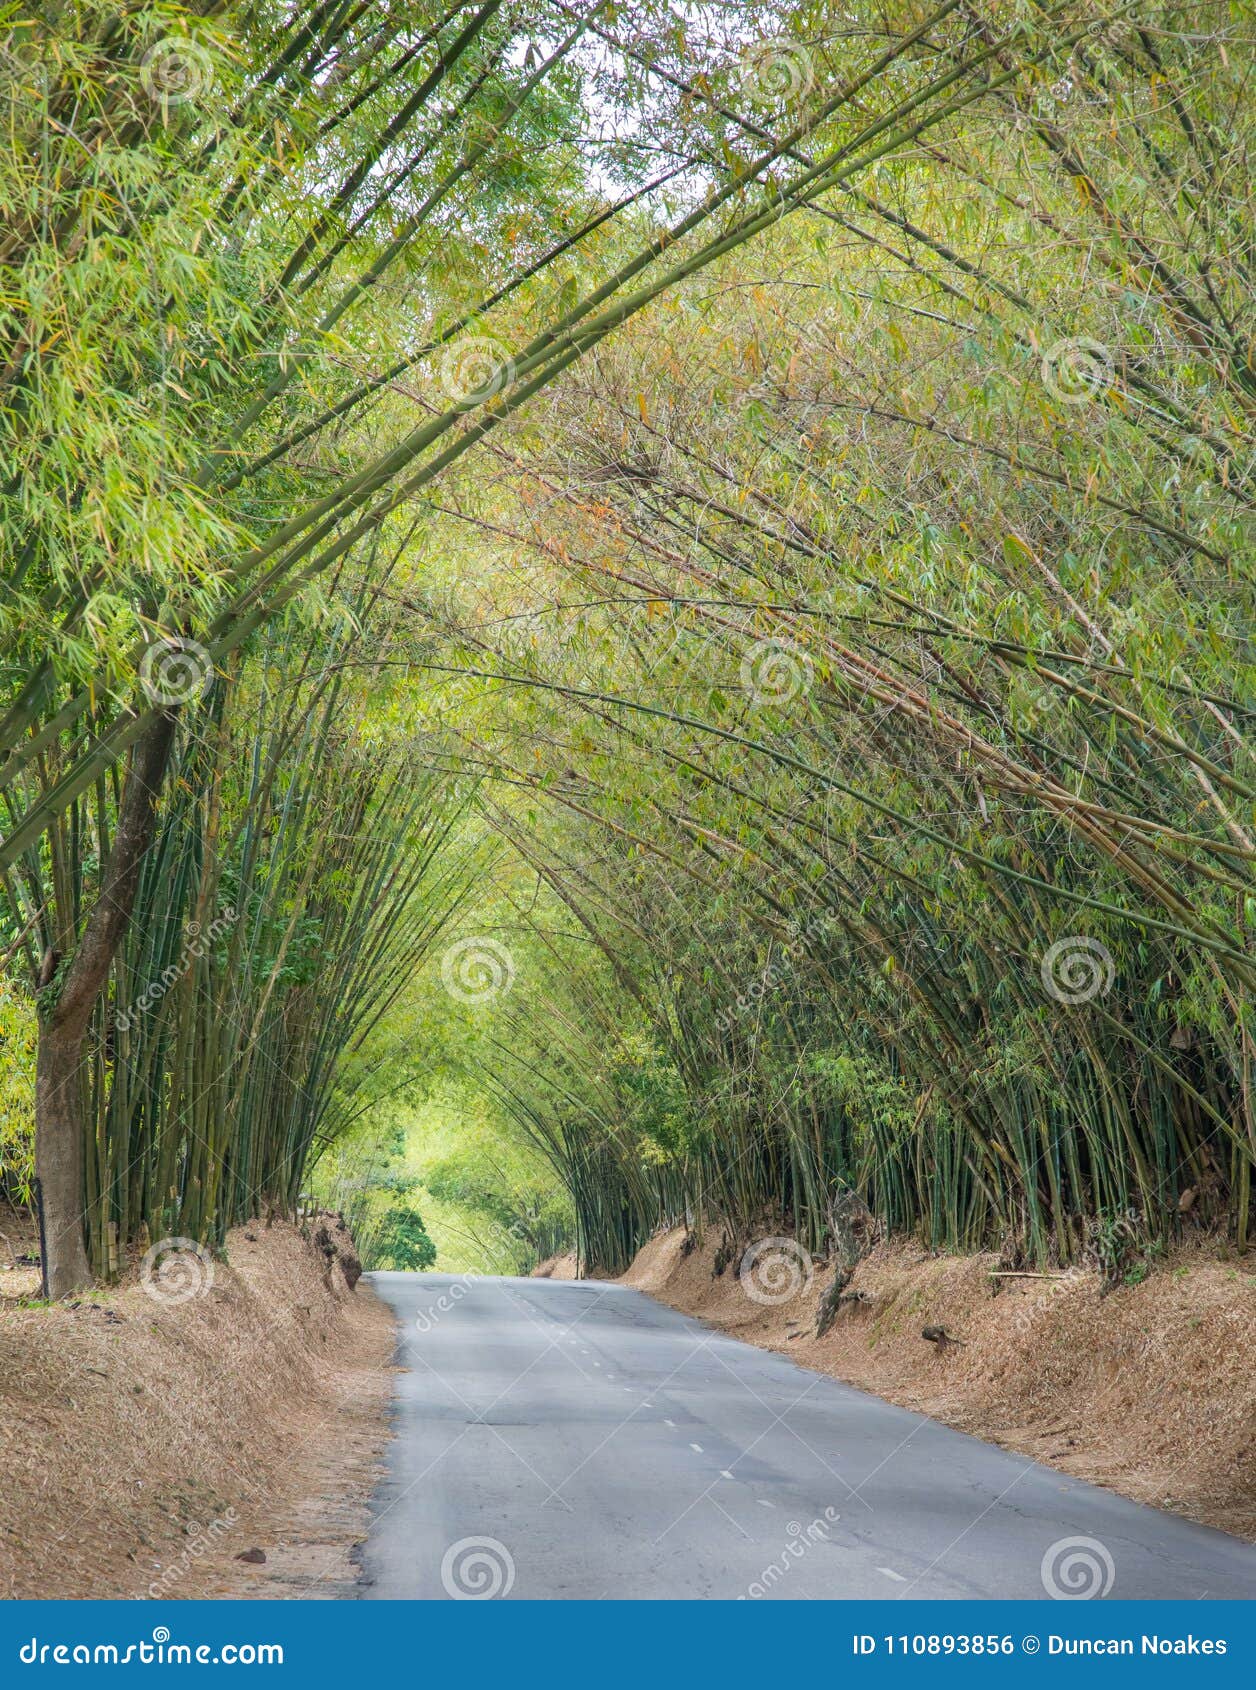 avenue with road and bamboo trees